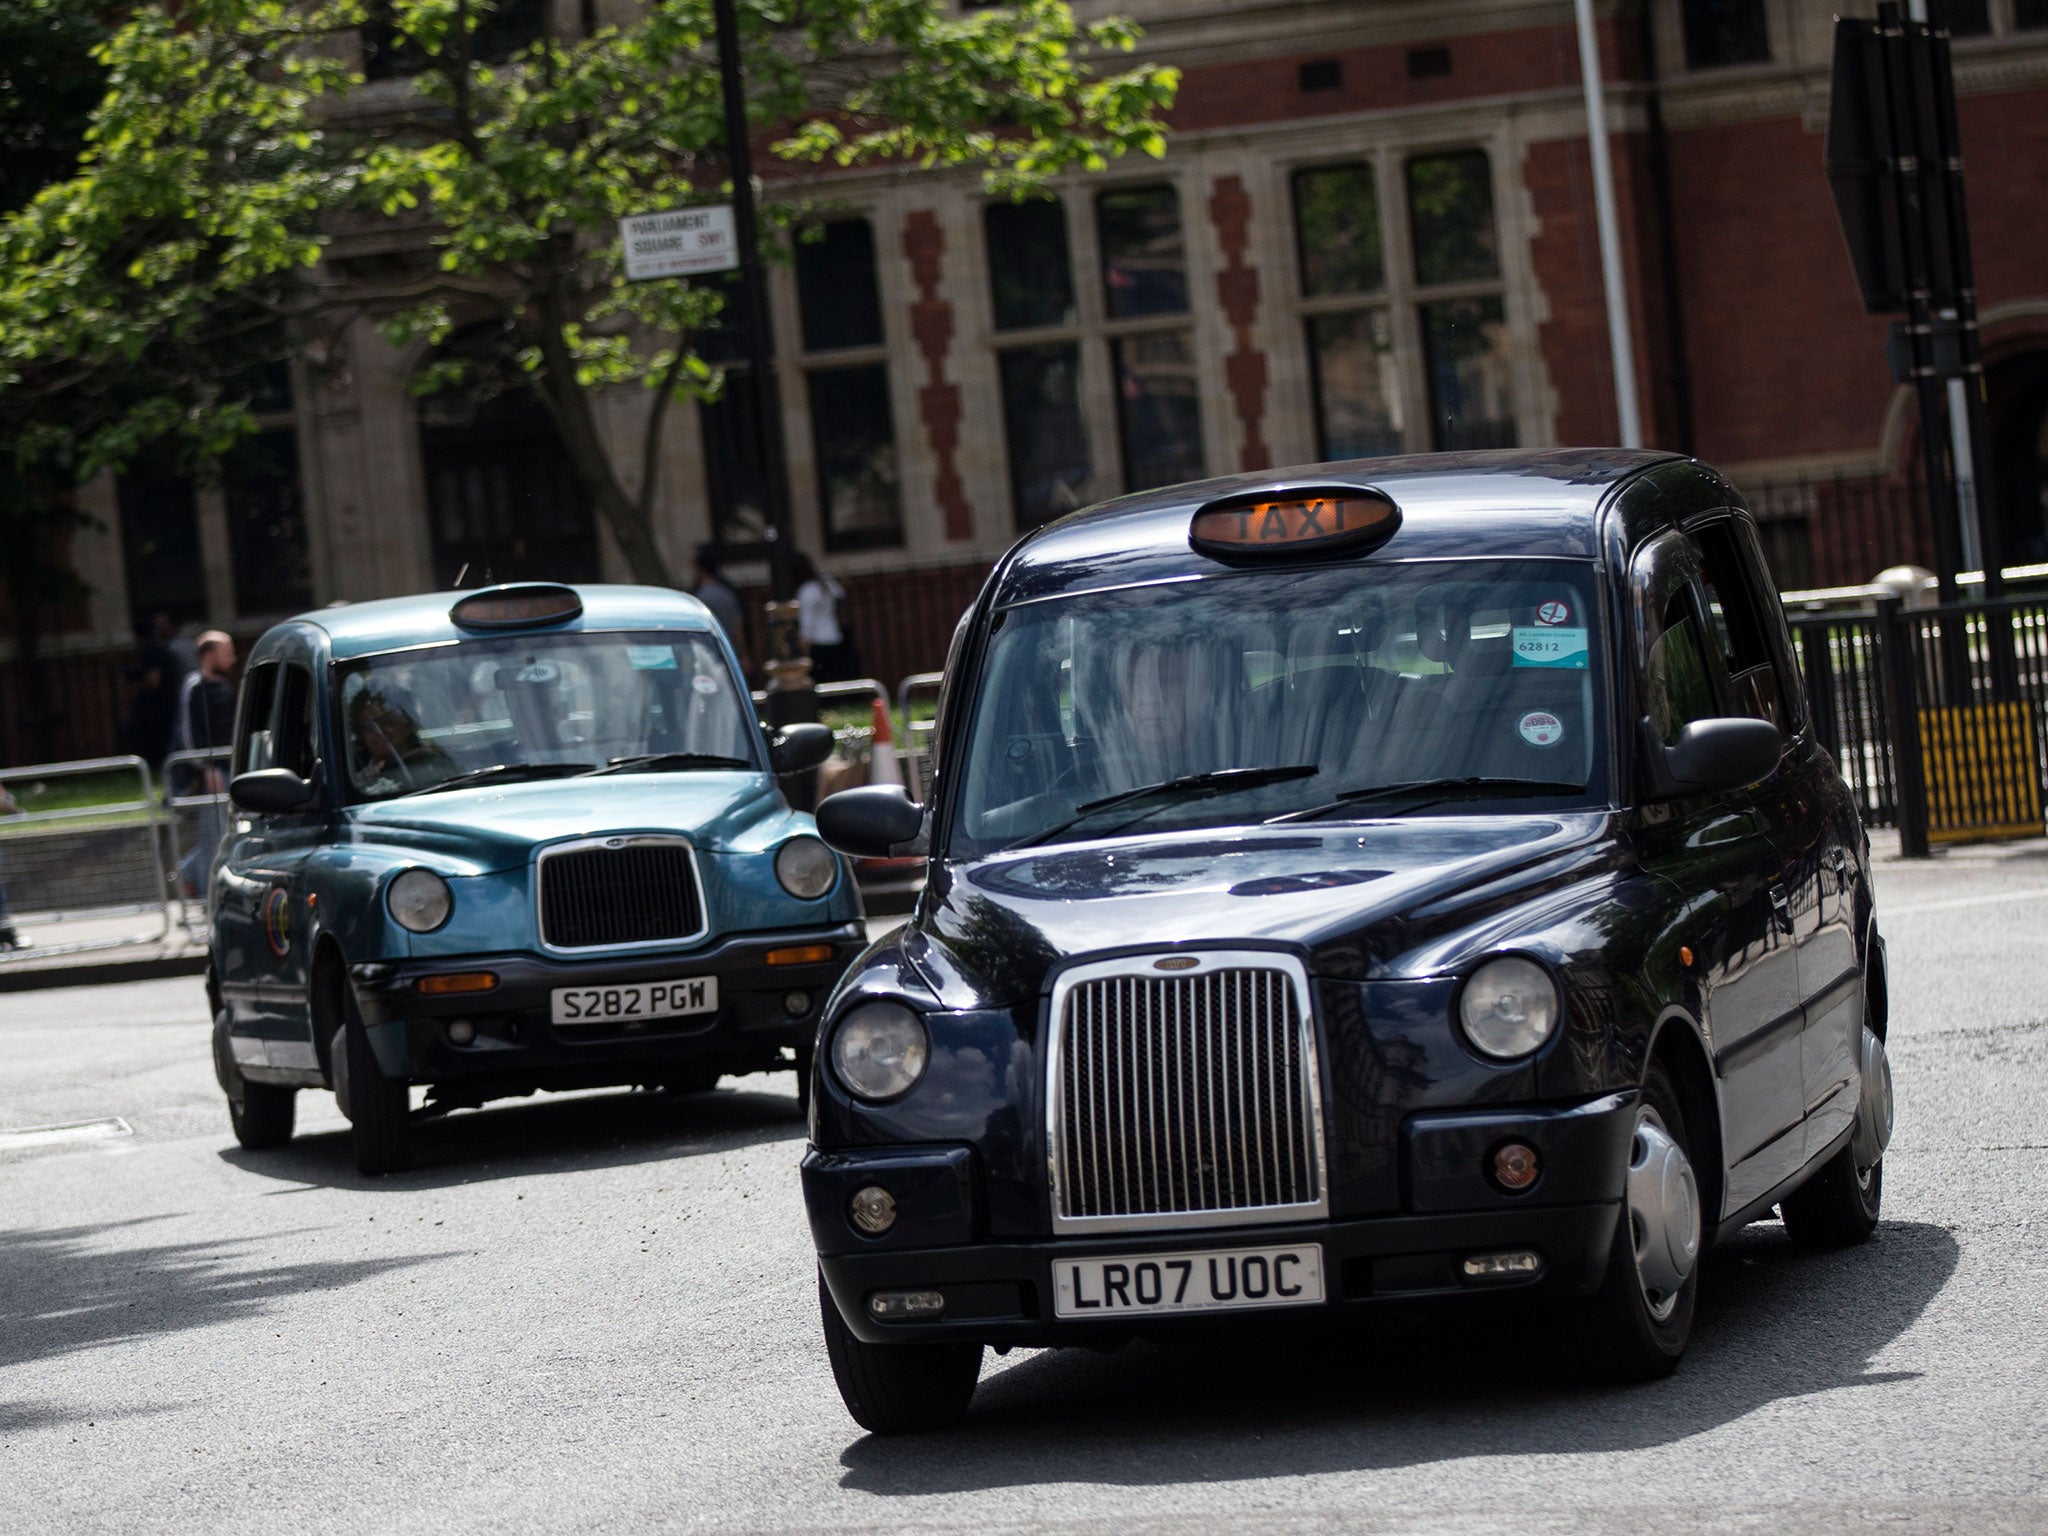 London S Black Cabs Take On Uber With Offpeak Fares The Independent